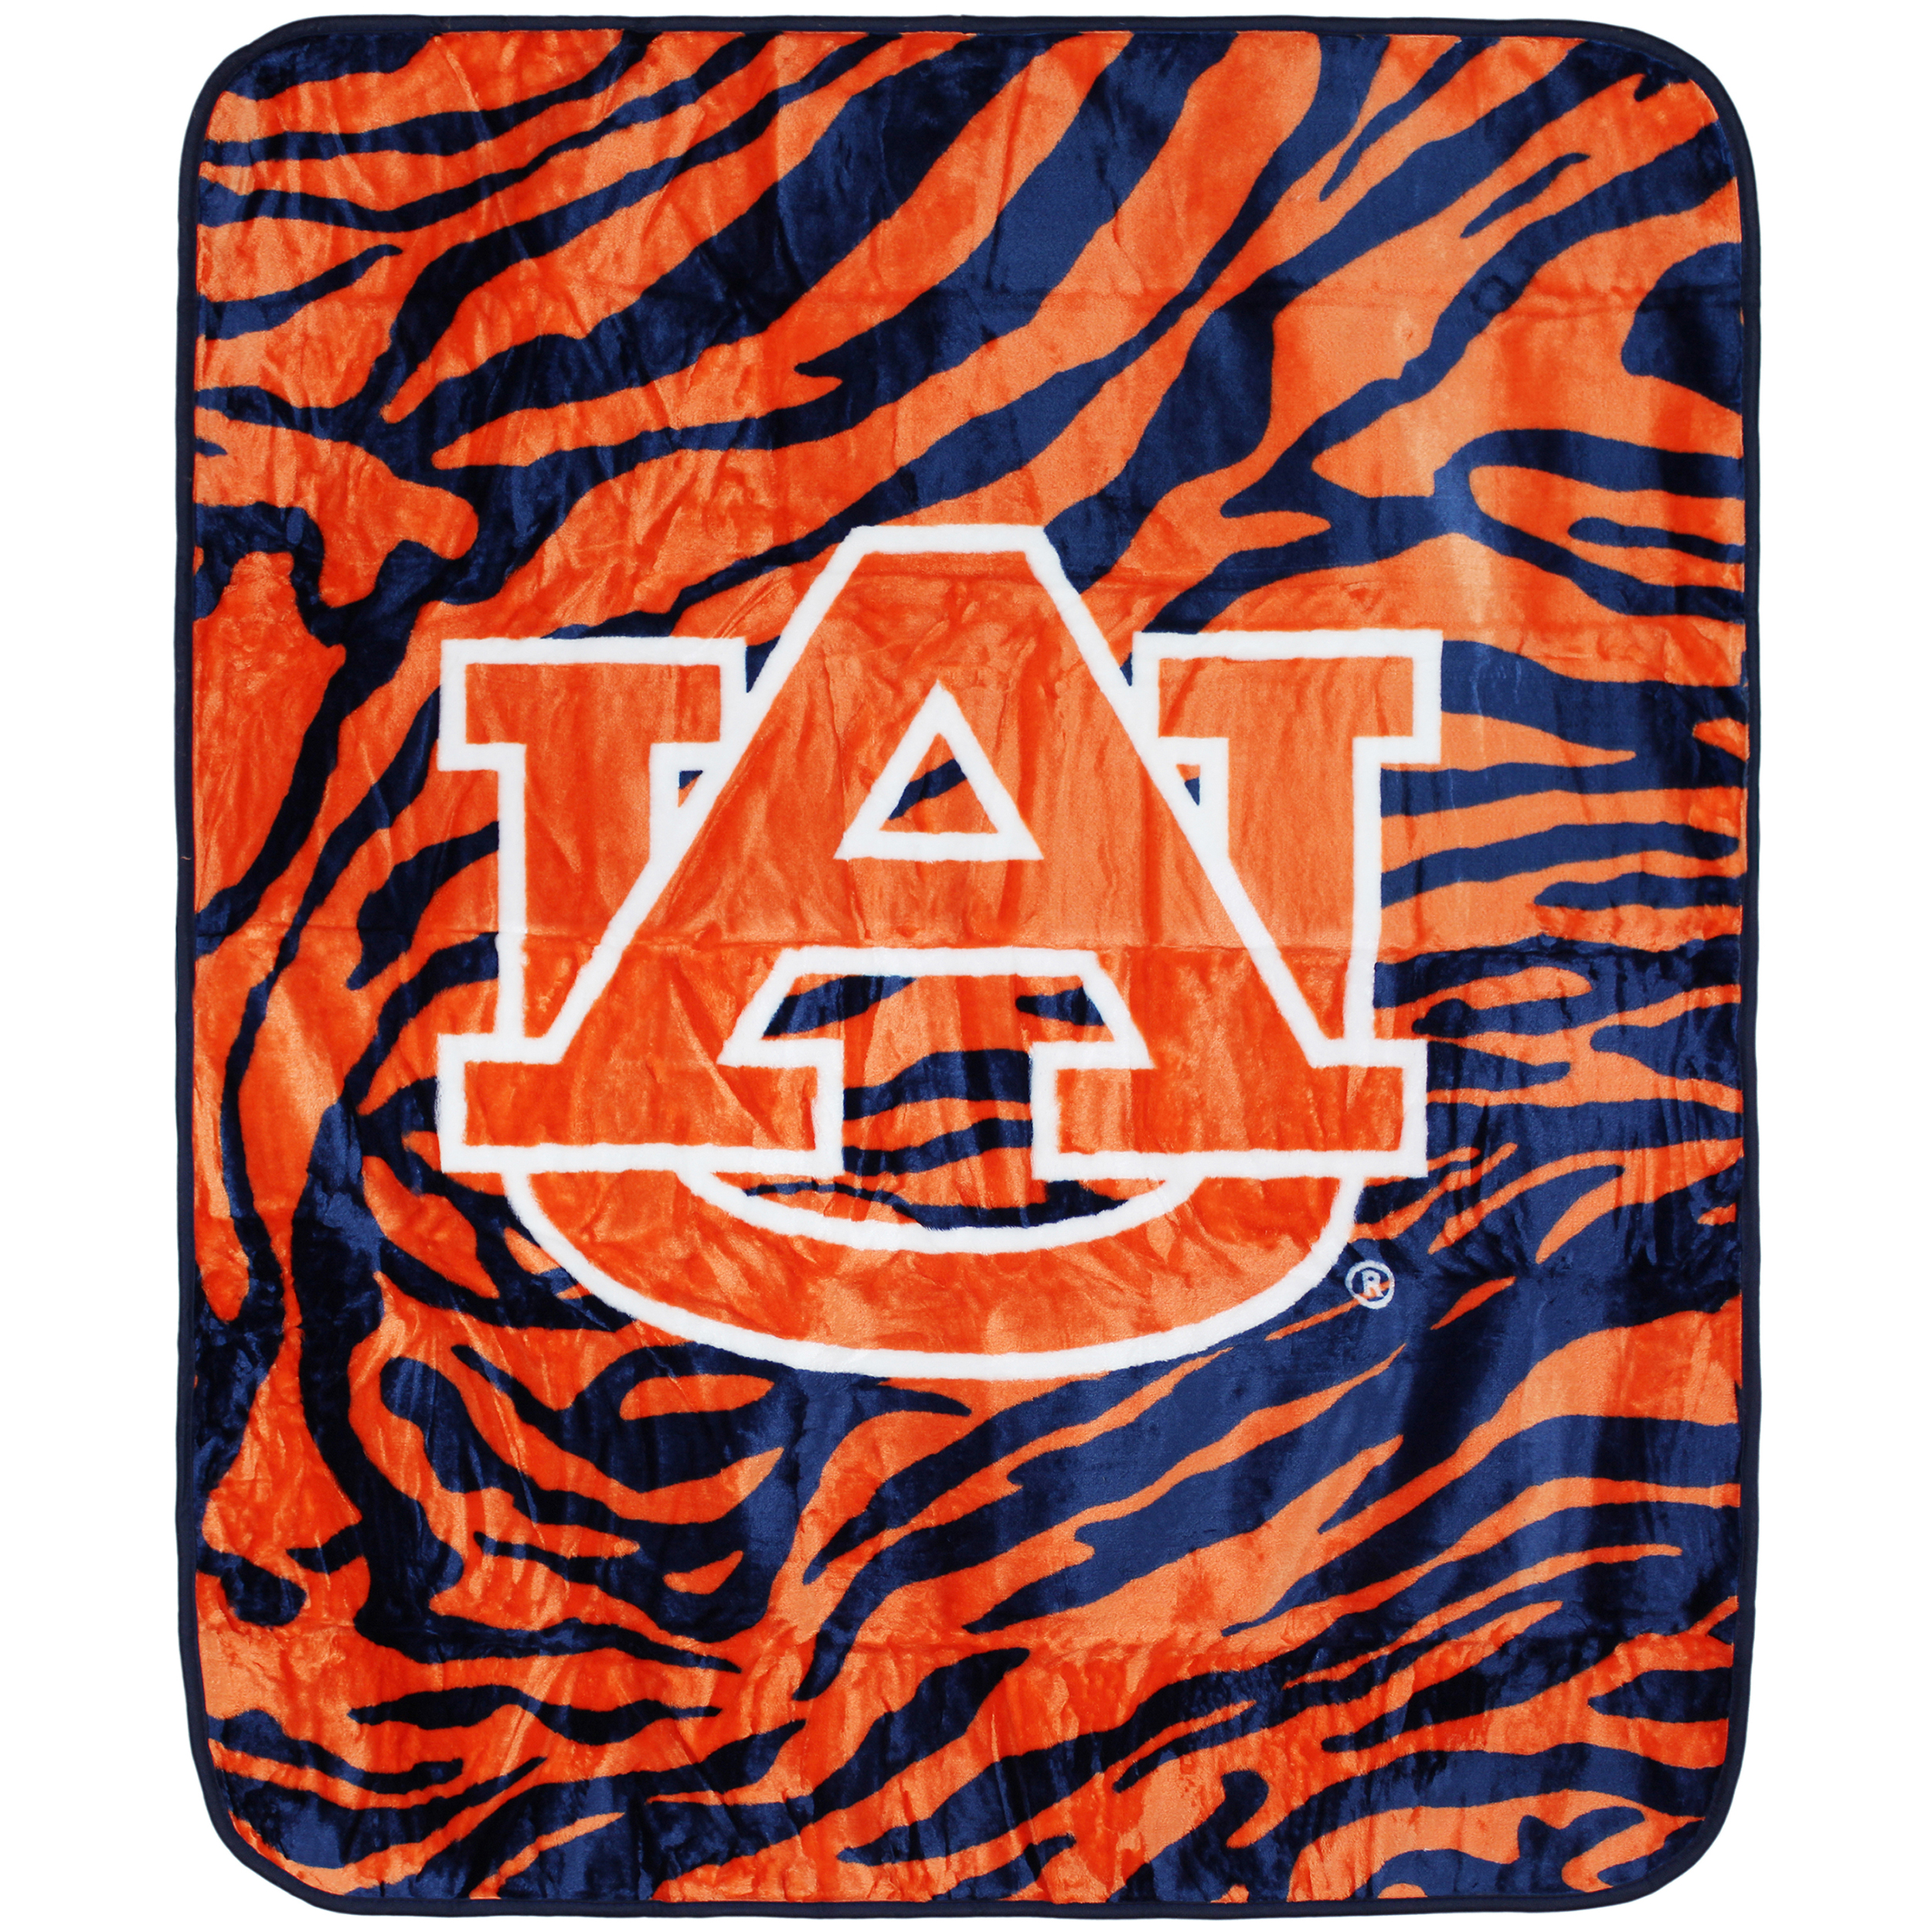 College Covers Everything Comfy Auburn Tigers Soft Raschel Throw Blanket, 60" x 50" - image 1 of 8